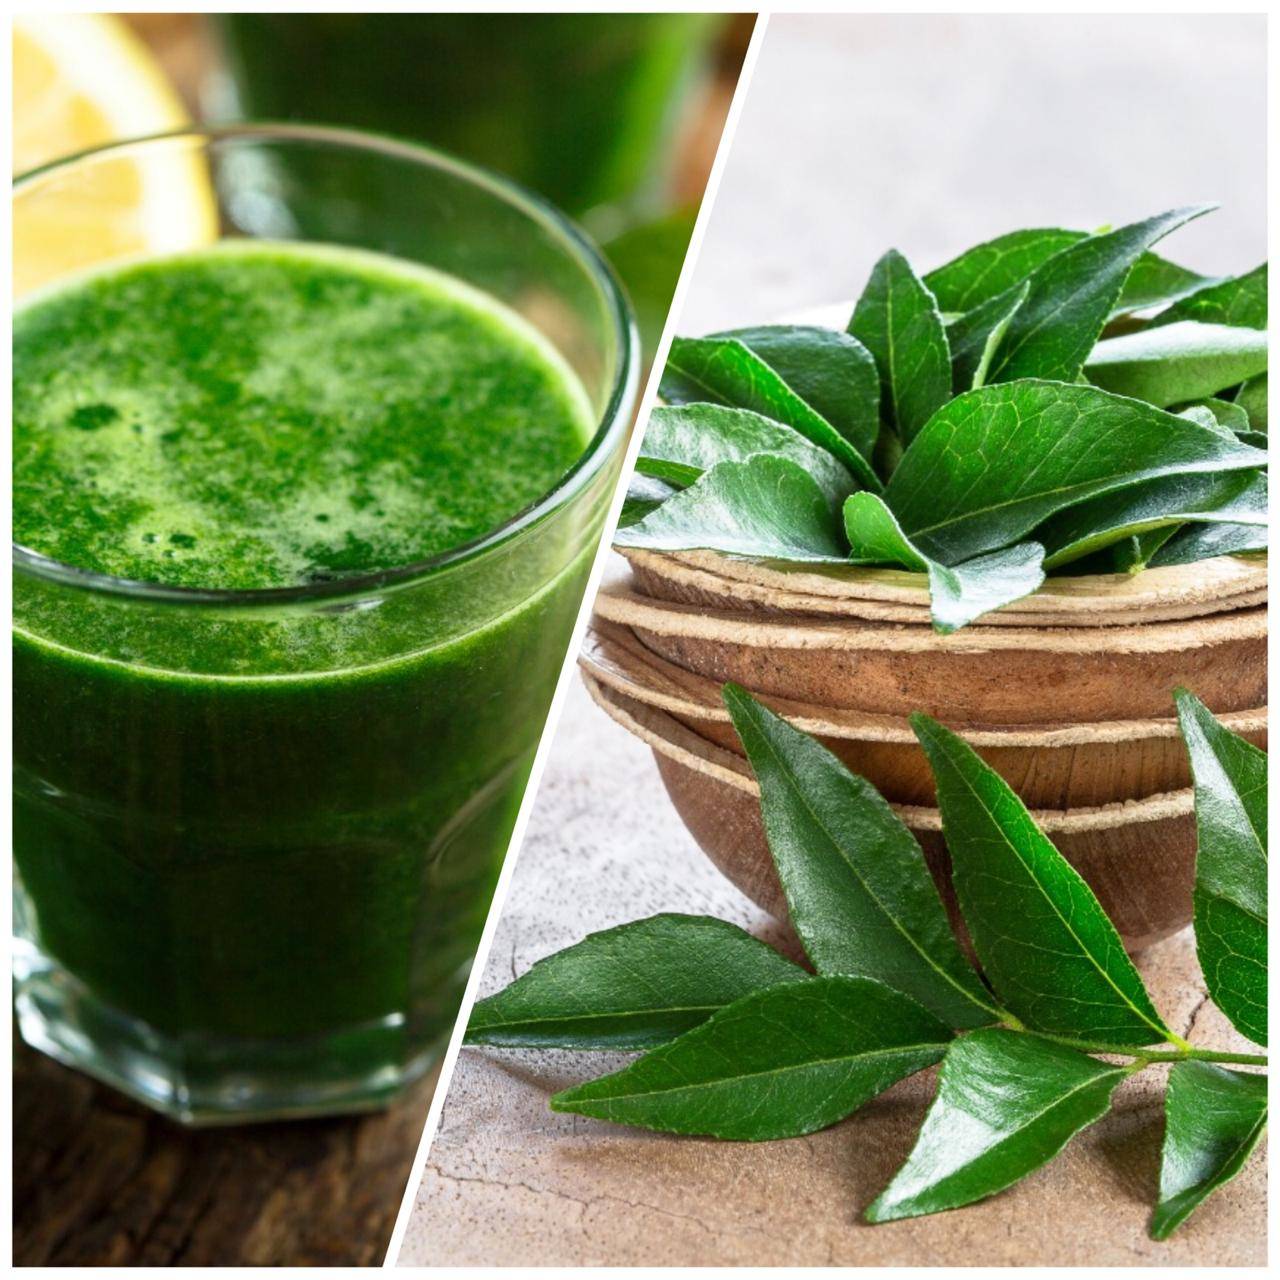 Drink these homemade juices to get back in shape before the festive season  - Times of India